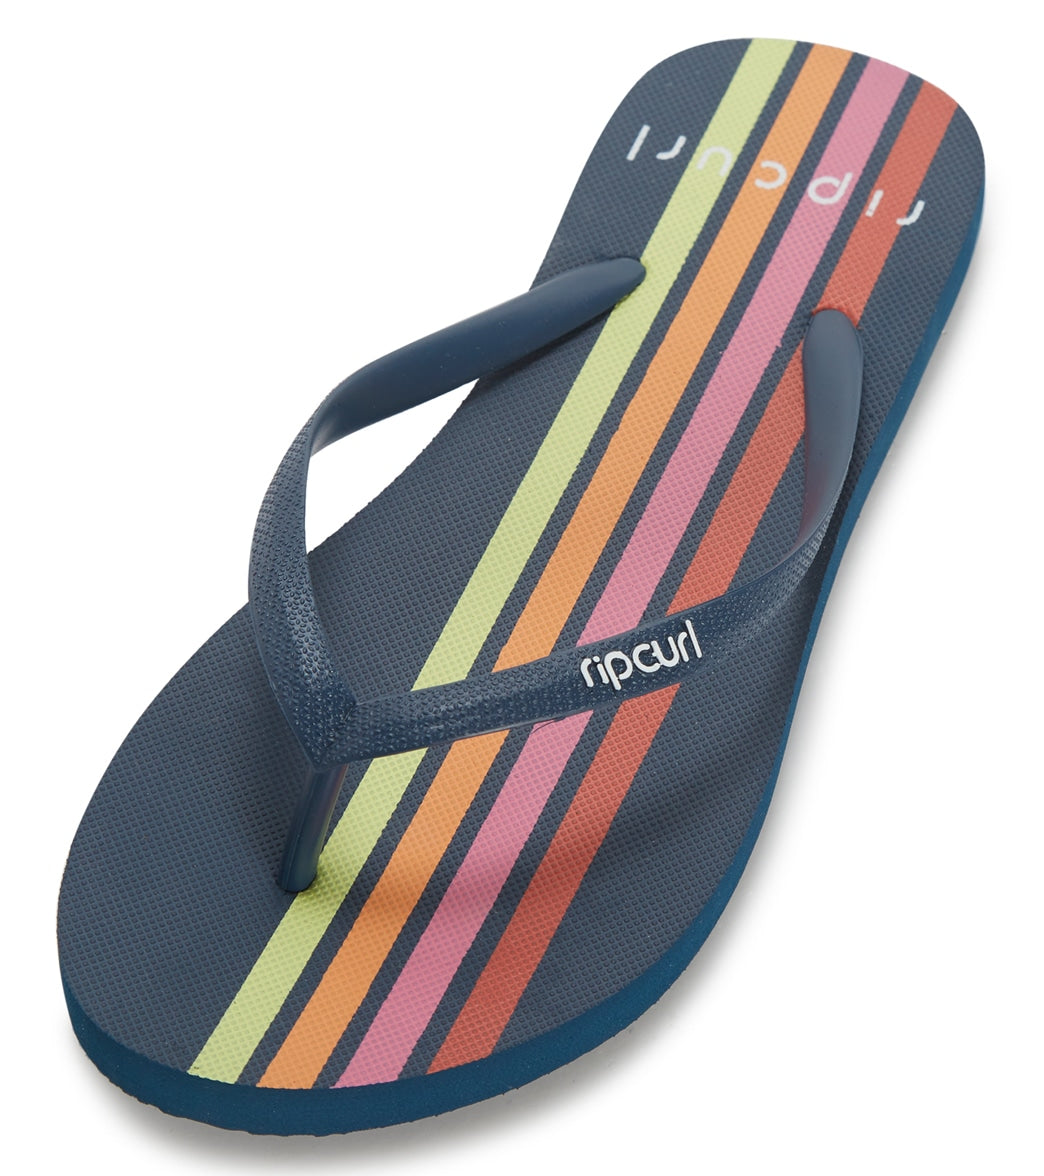 Rip Curl Womens Wave Shapers Flip Flop